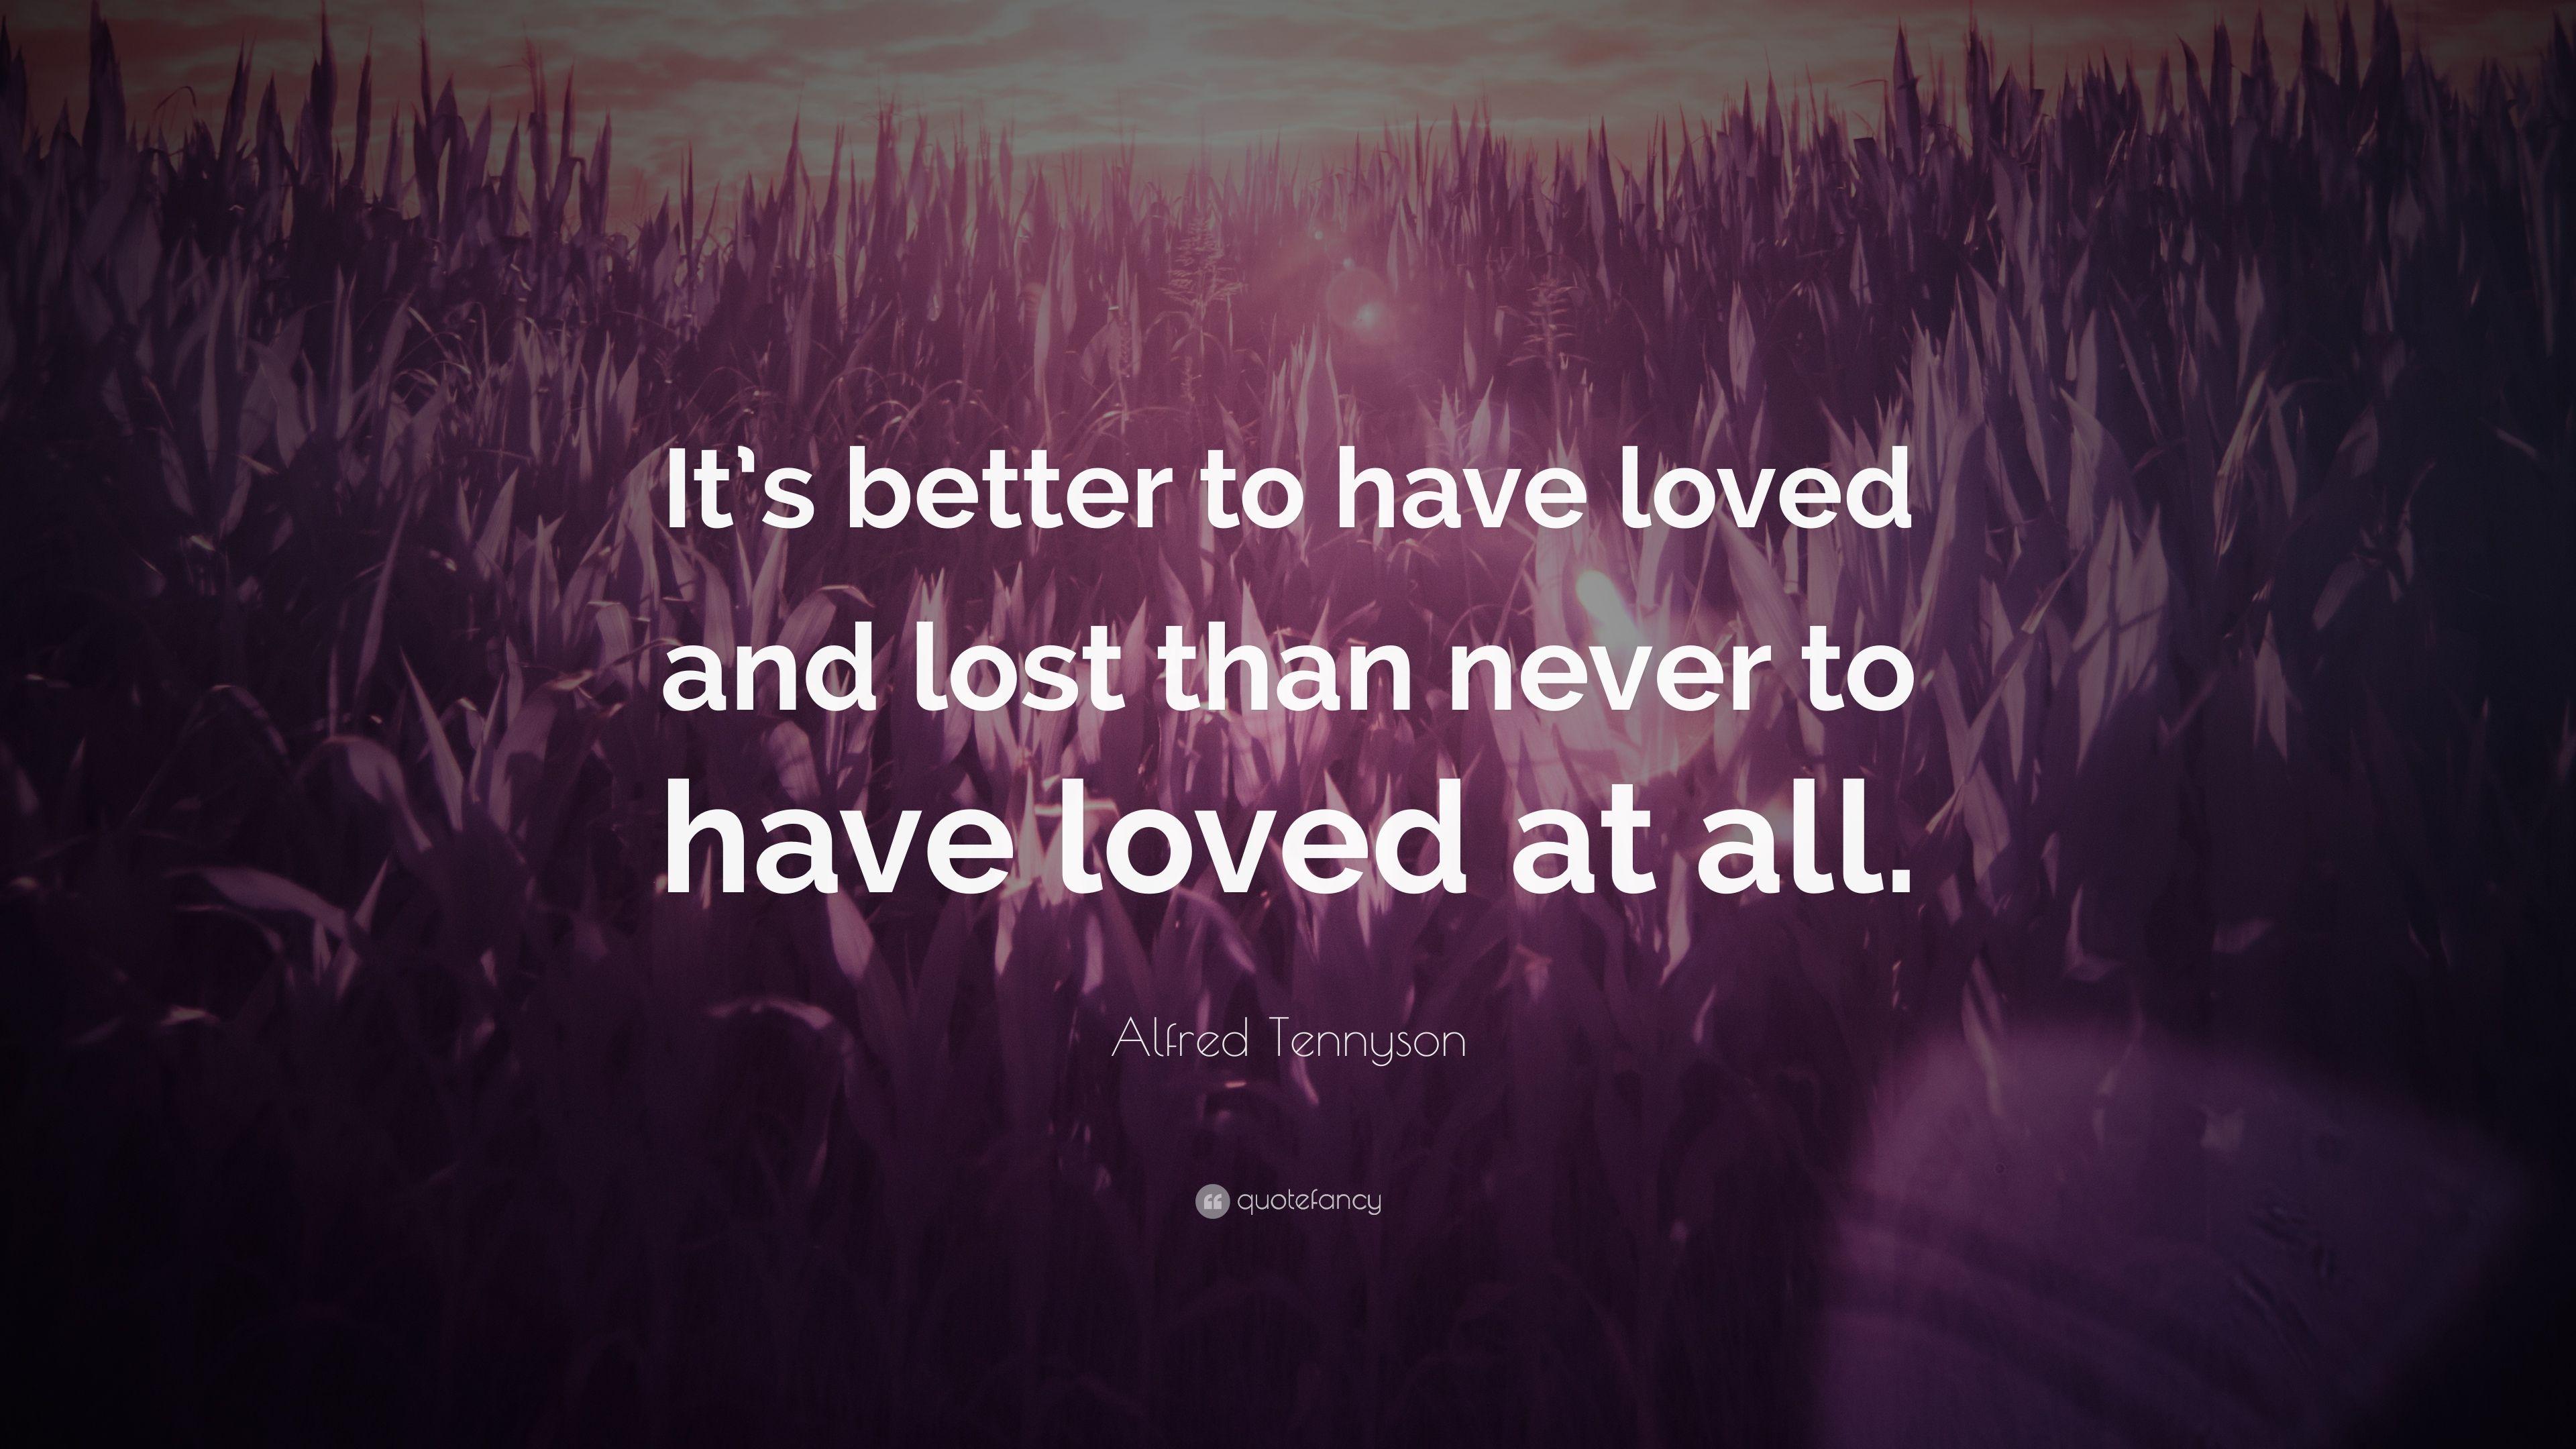 Alfred Tennyson Quote: “It's better to have loved and lost than